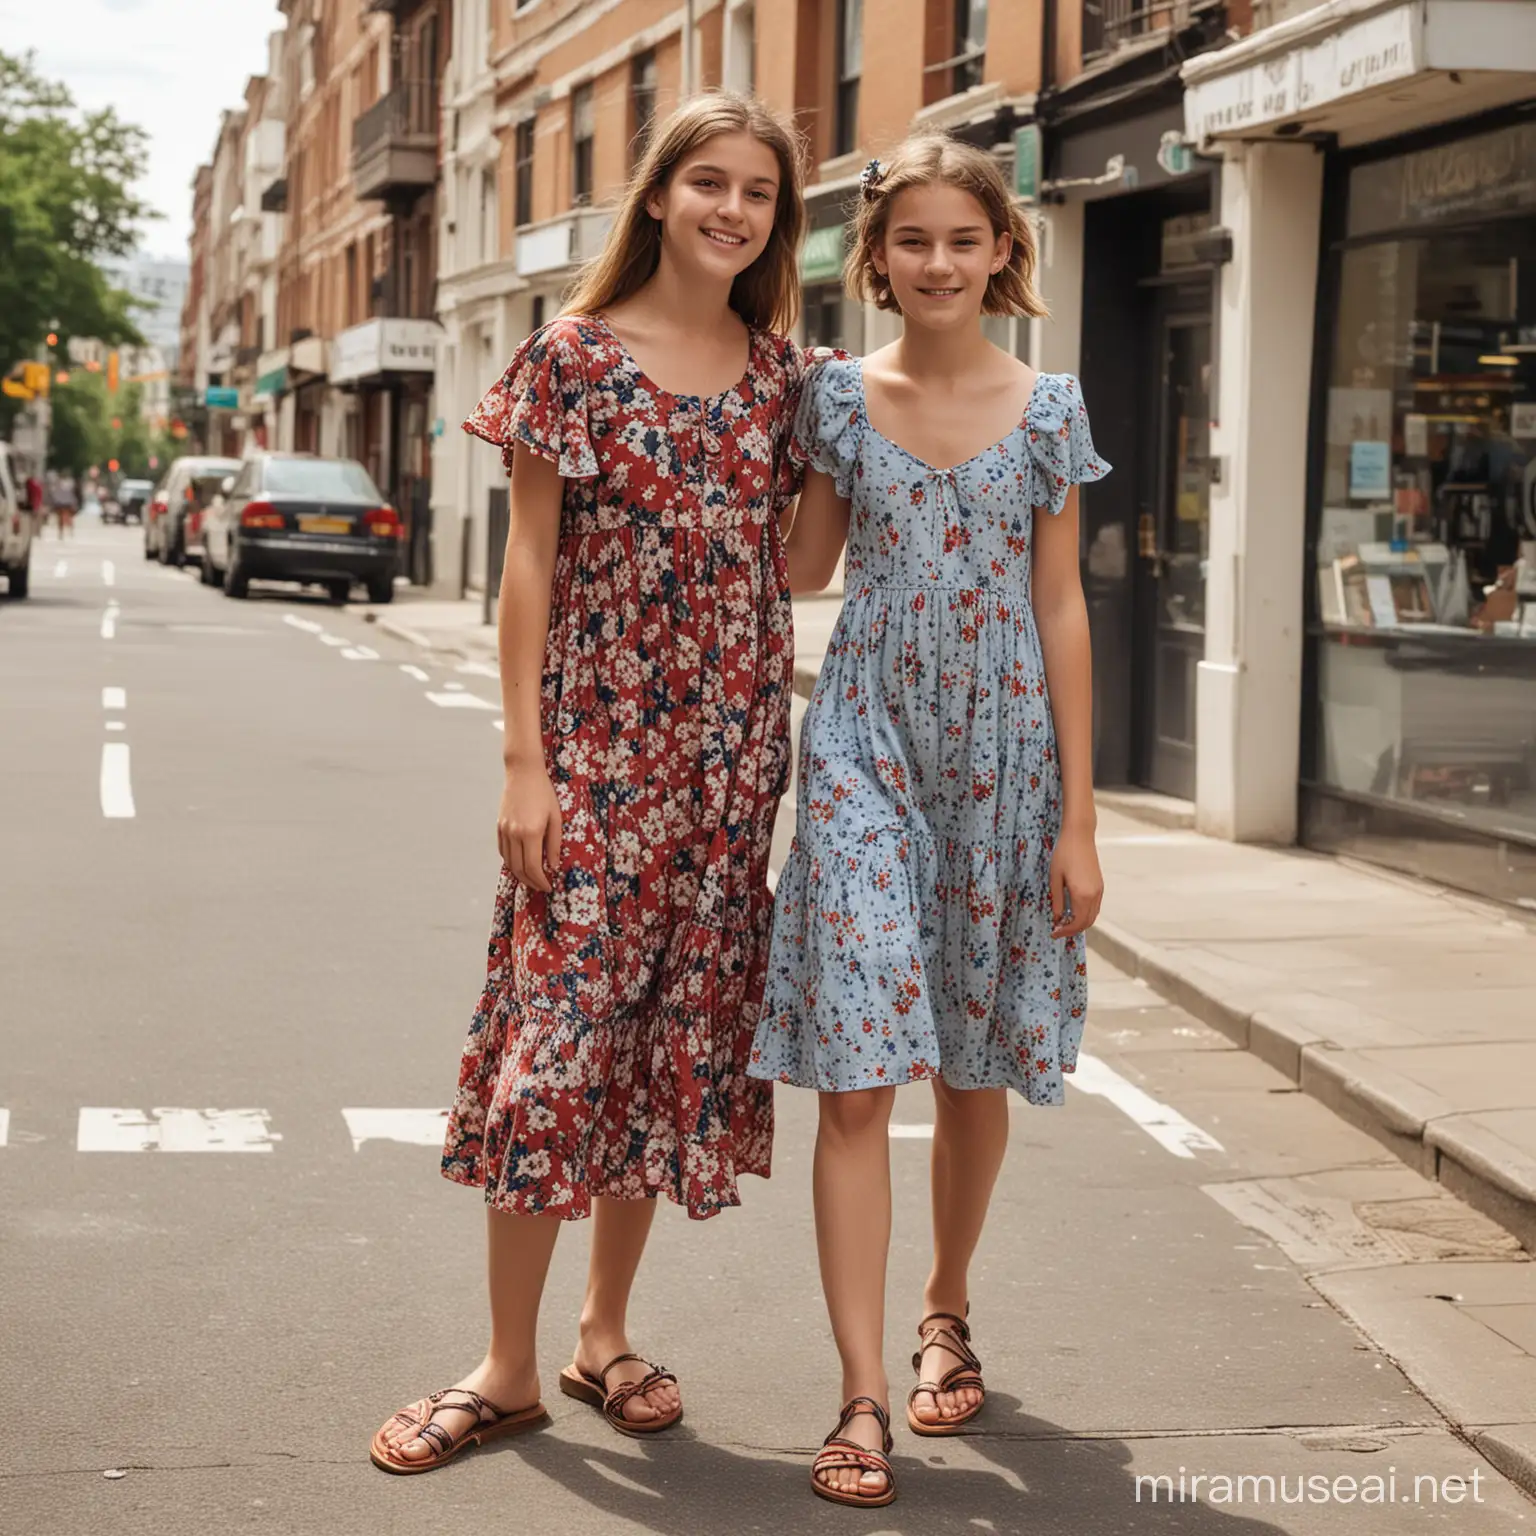 a teenage boy has to wear a new knee-length floral summer dress with sandals while he is out in the city with his older sister